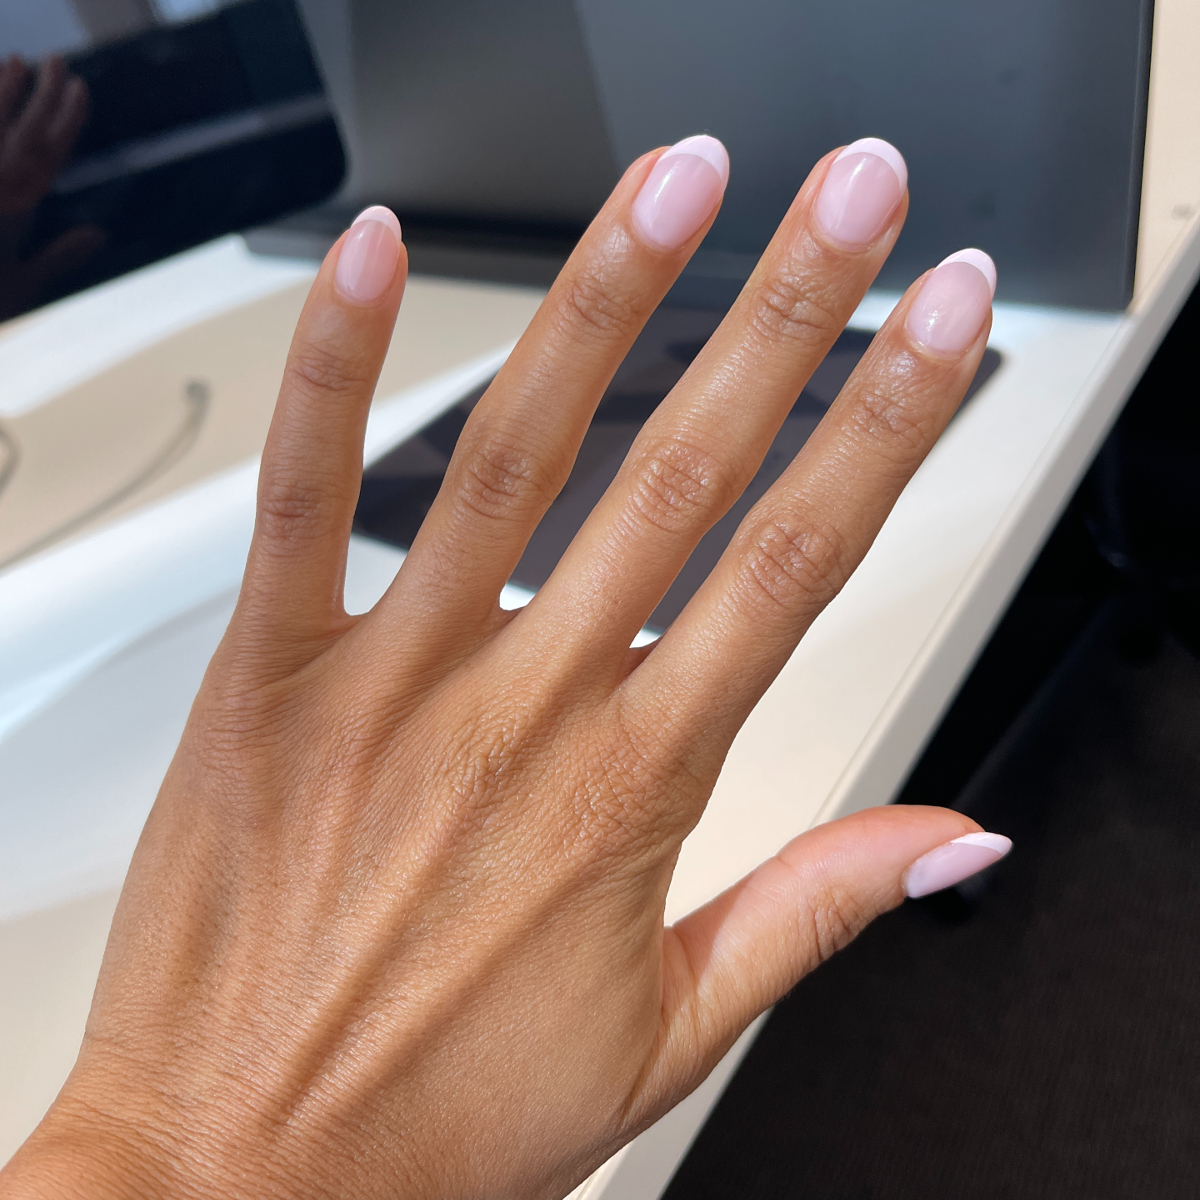 4 Women Honestly Review Gel-X Manicures (+ 42 Nail Art Ideas We Actually  Tried) - Emily Henderson